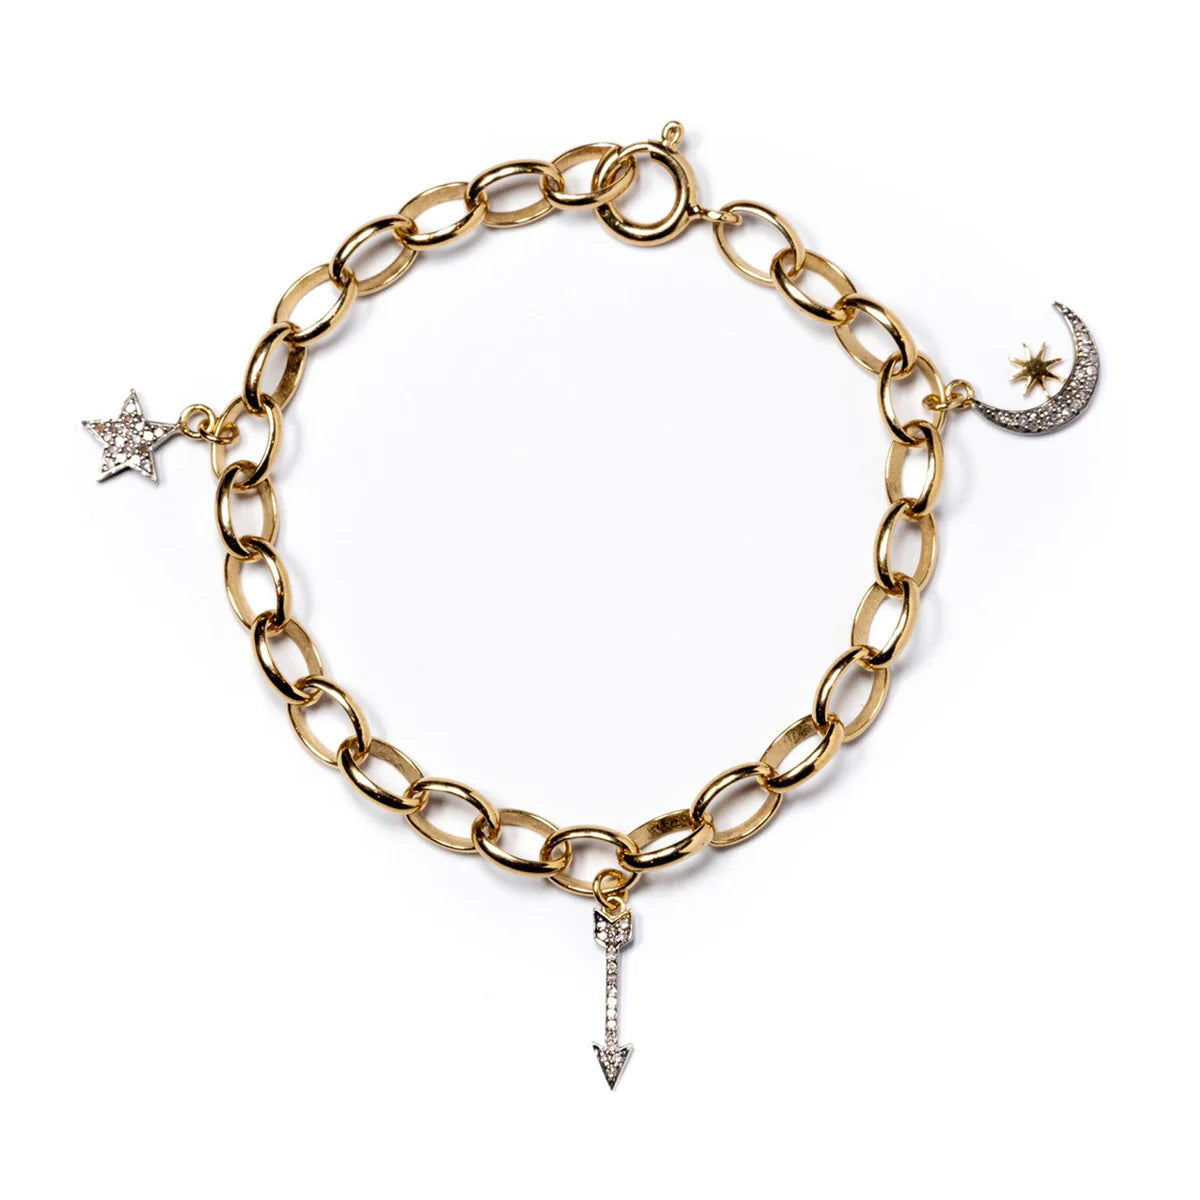 Gold pendant bracelet with oval belcher chain and pave diamond star arrow and moon pendants